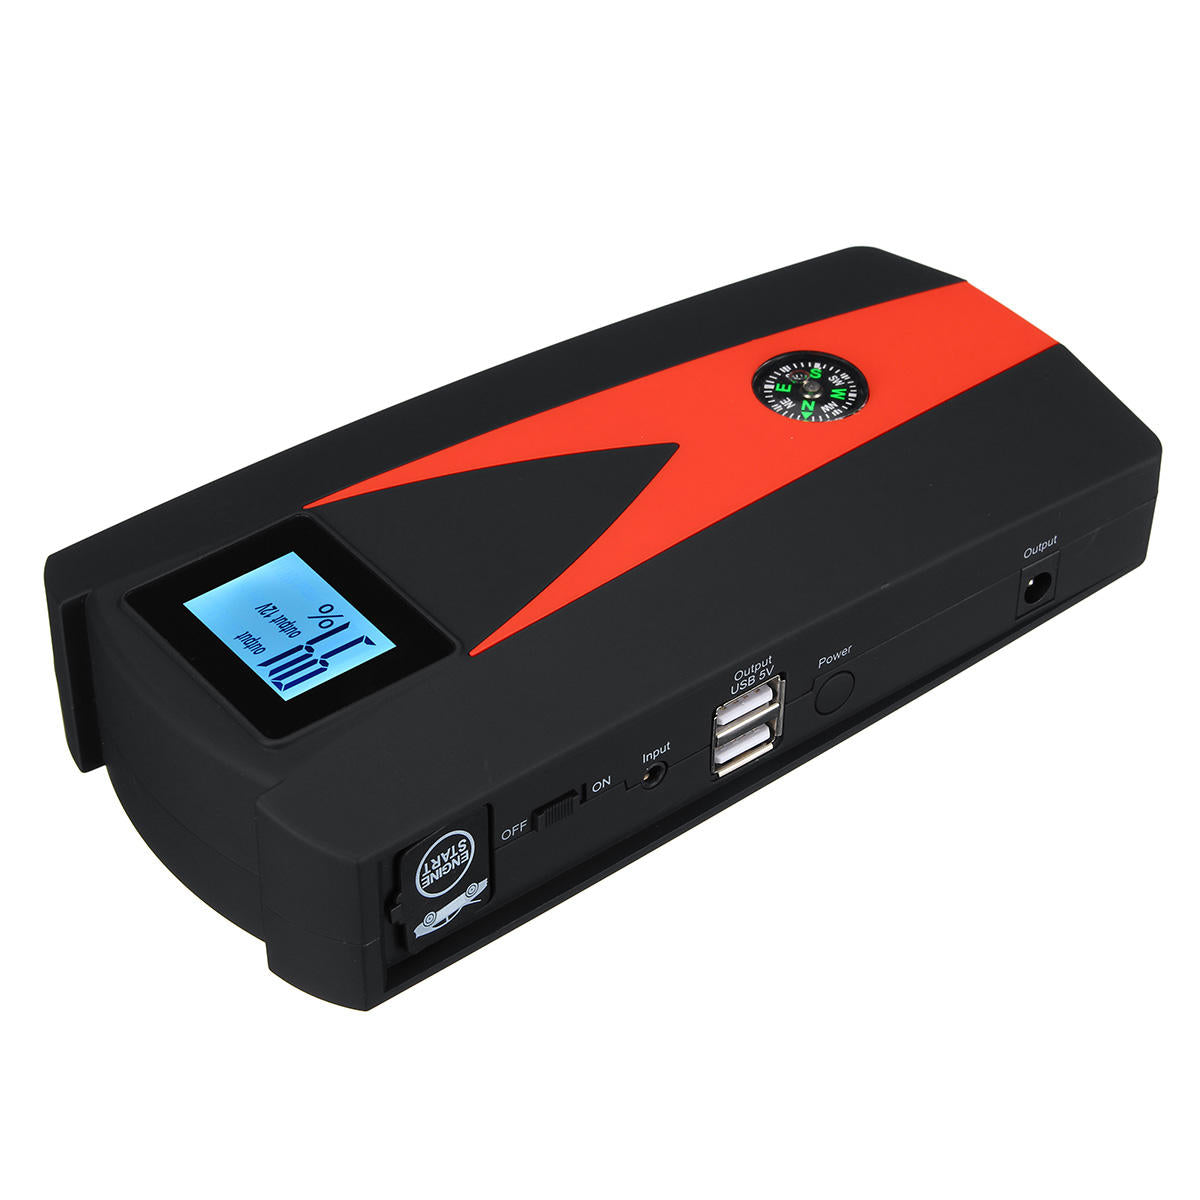 Skyorium 99900 mAh Dual USB Car Jump Starter LCD Auto Battery Booster Portable Power Pack with Jumper Cables - US Plug